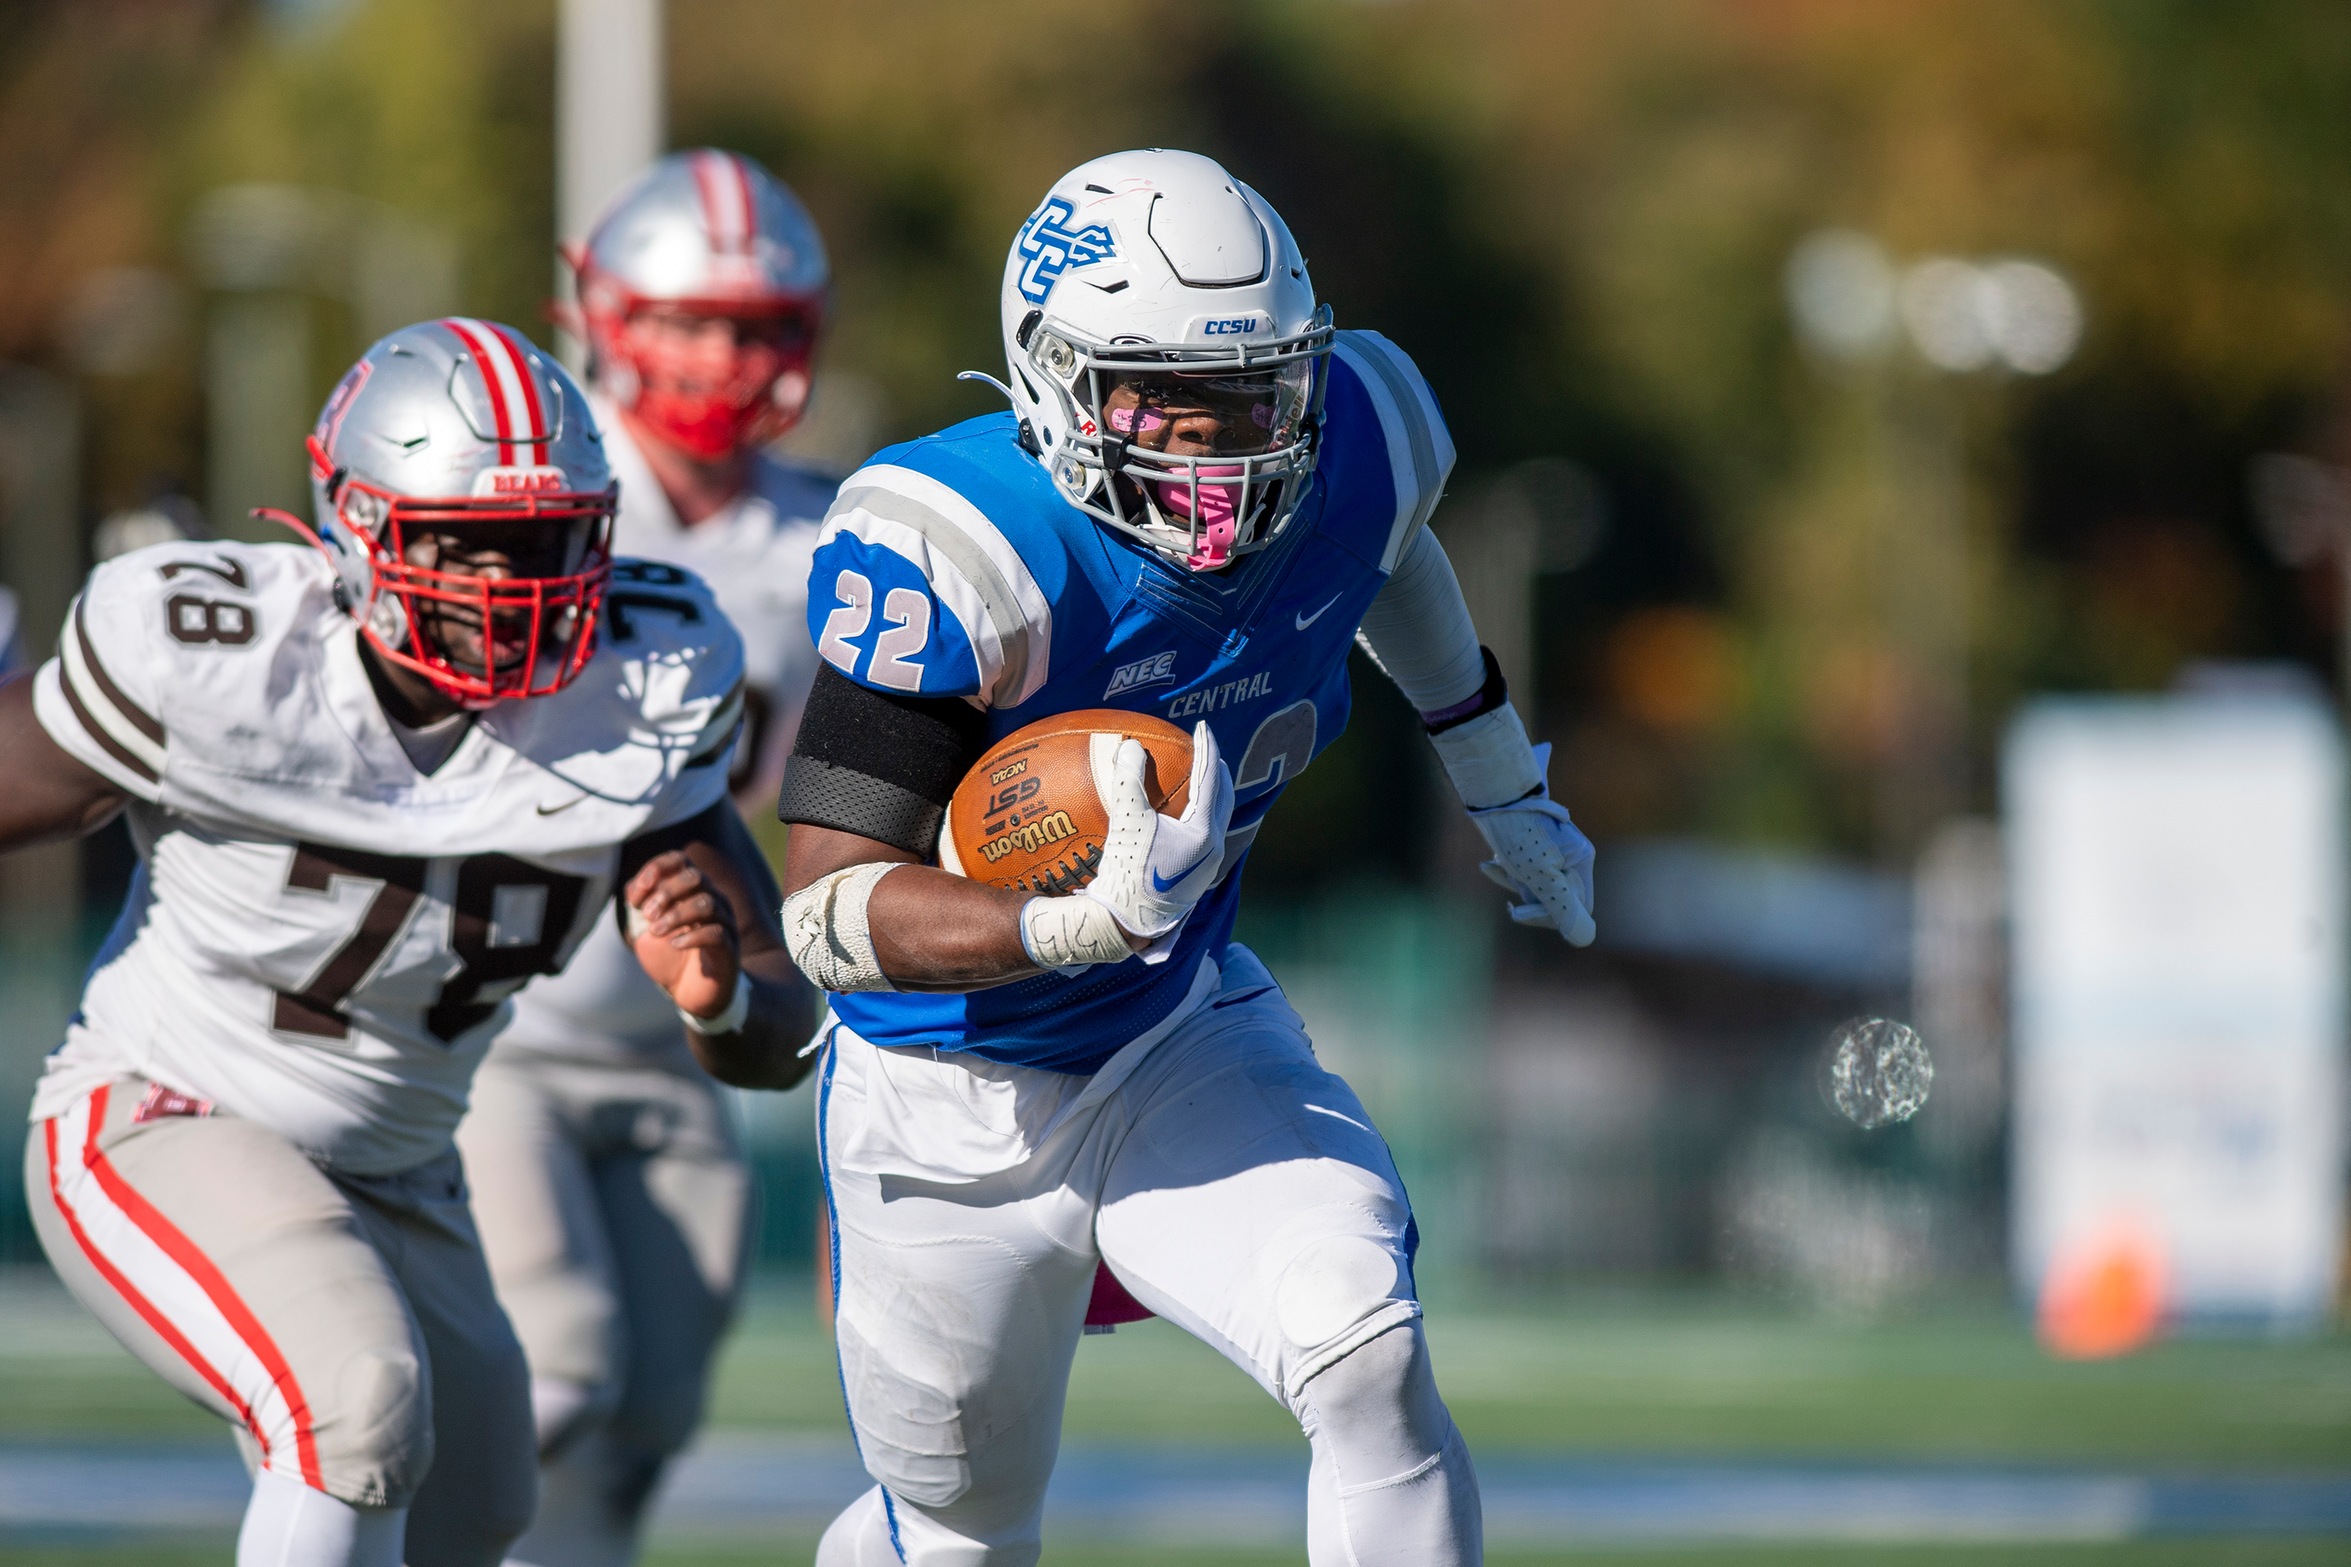 Nasir Smith rushed for a career-high 145 yards on October 8, 2022 versus Brown. (Photo: Steve McLaughlin)